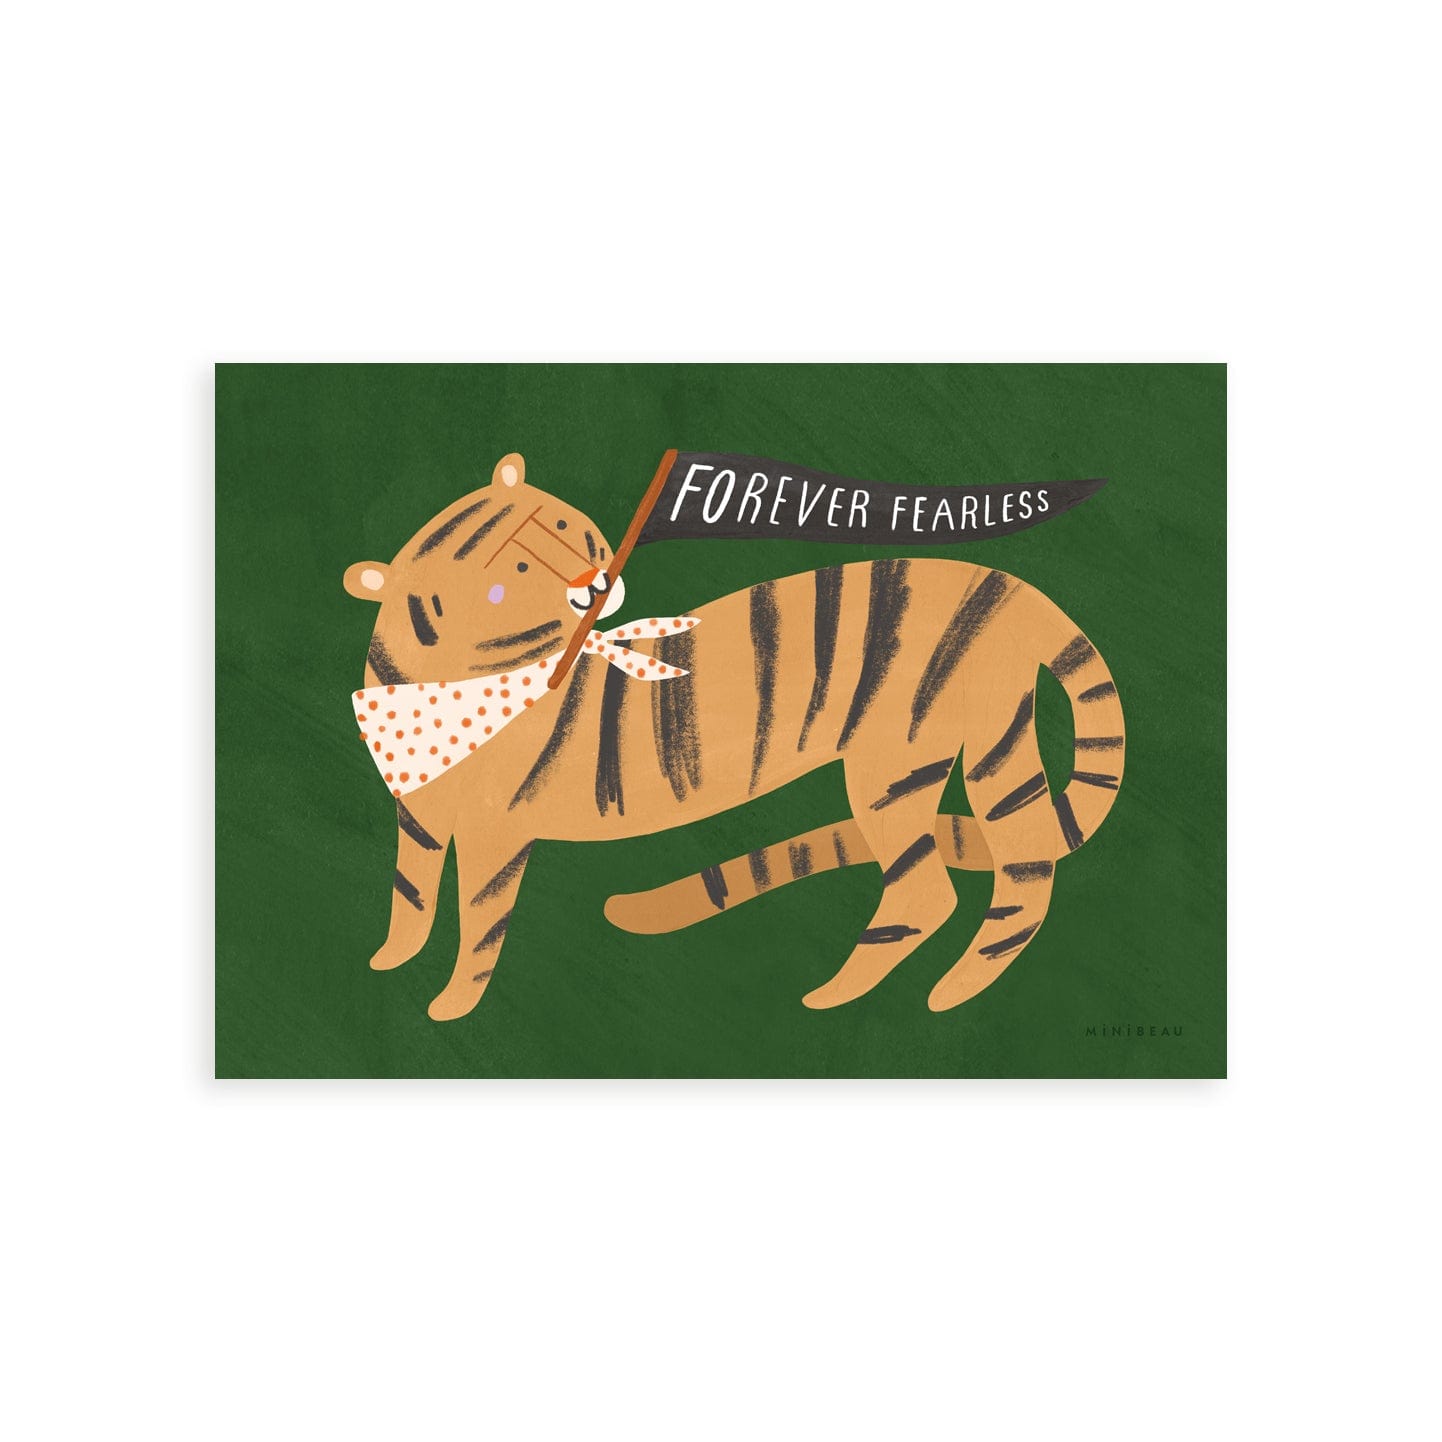 Our forever fearless art print features a smiling tiger wearing a white bandana with orange polka dots. It's head is turned over it's shoulder and it is holding a black triangle flag with the words FOREVER FEARLESS in white, it it's mouth. All on a green background.